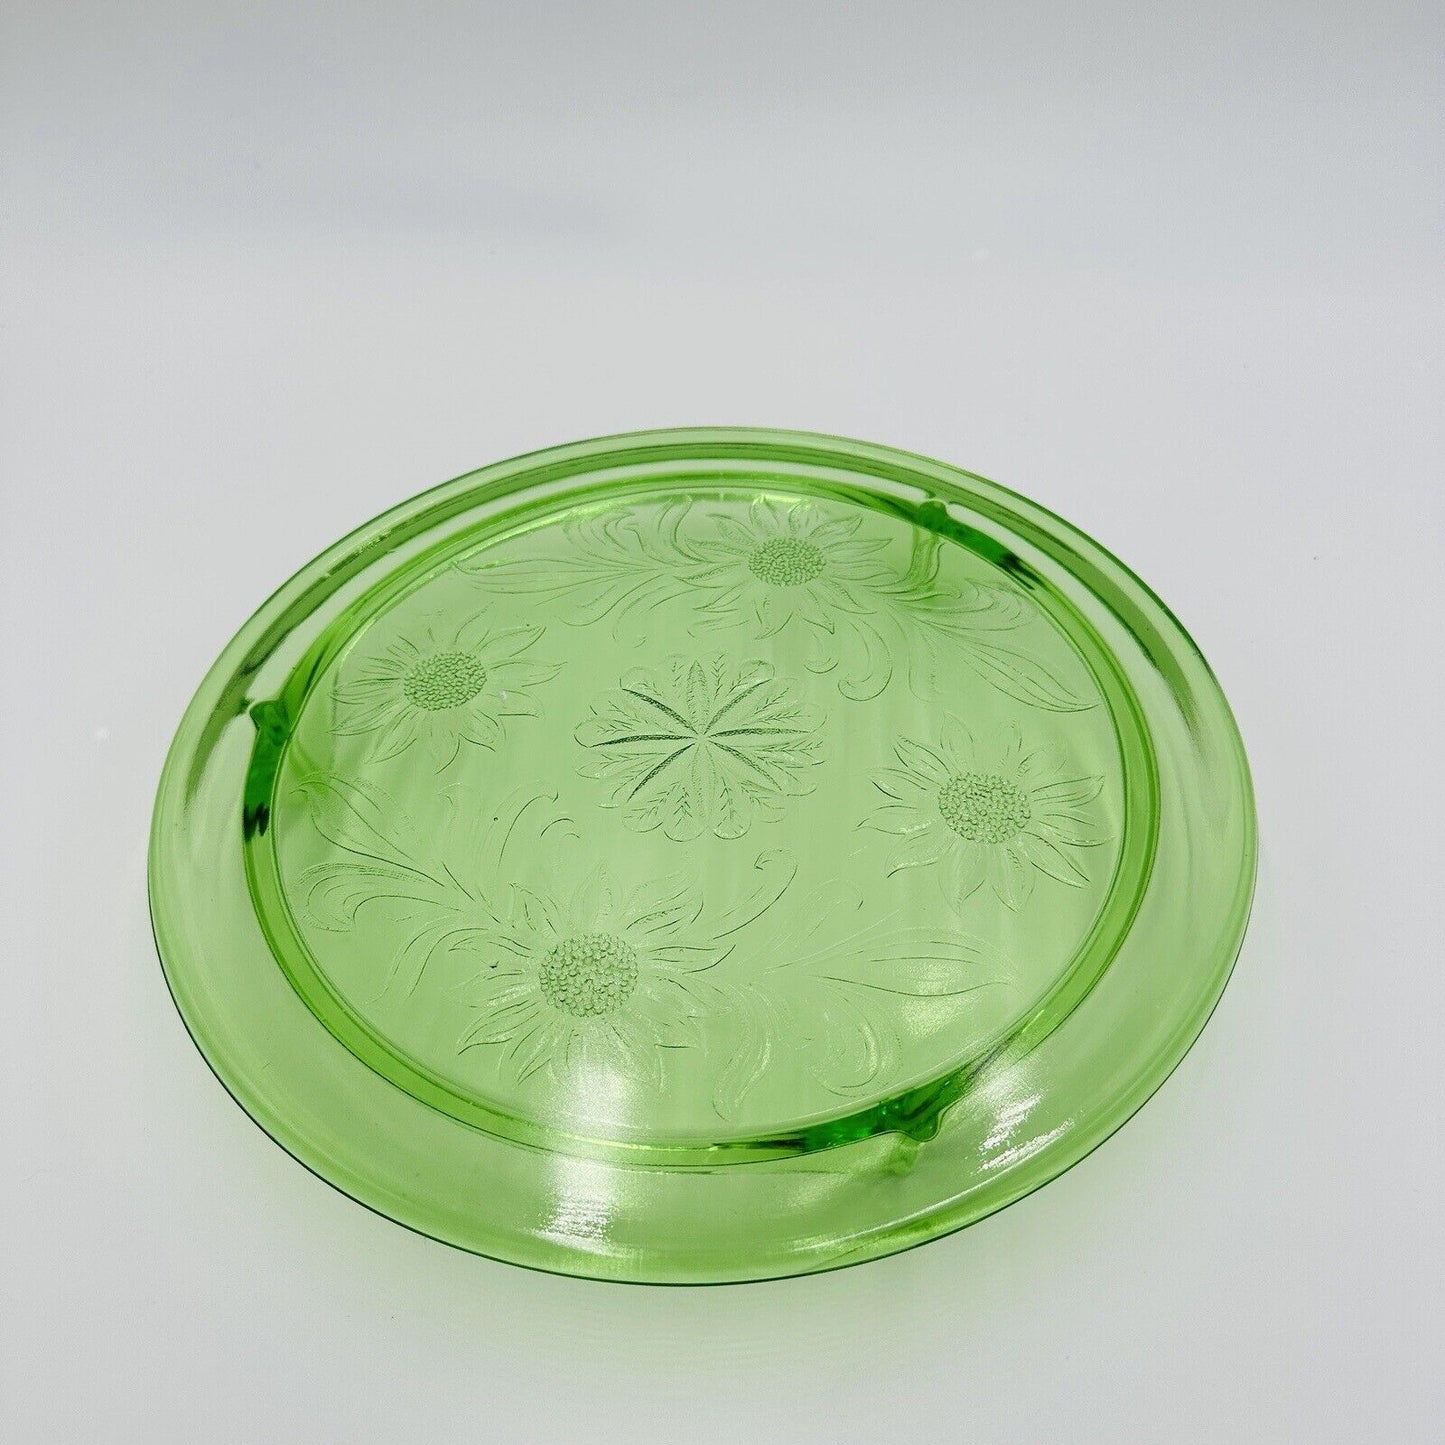 Jeannette Sunflower Depression Glass Uranium Footed Cake Plate 10 Tray Vintage